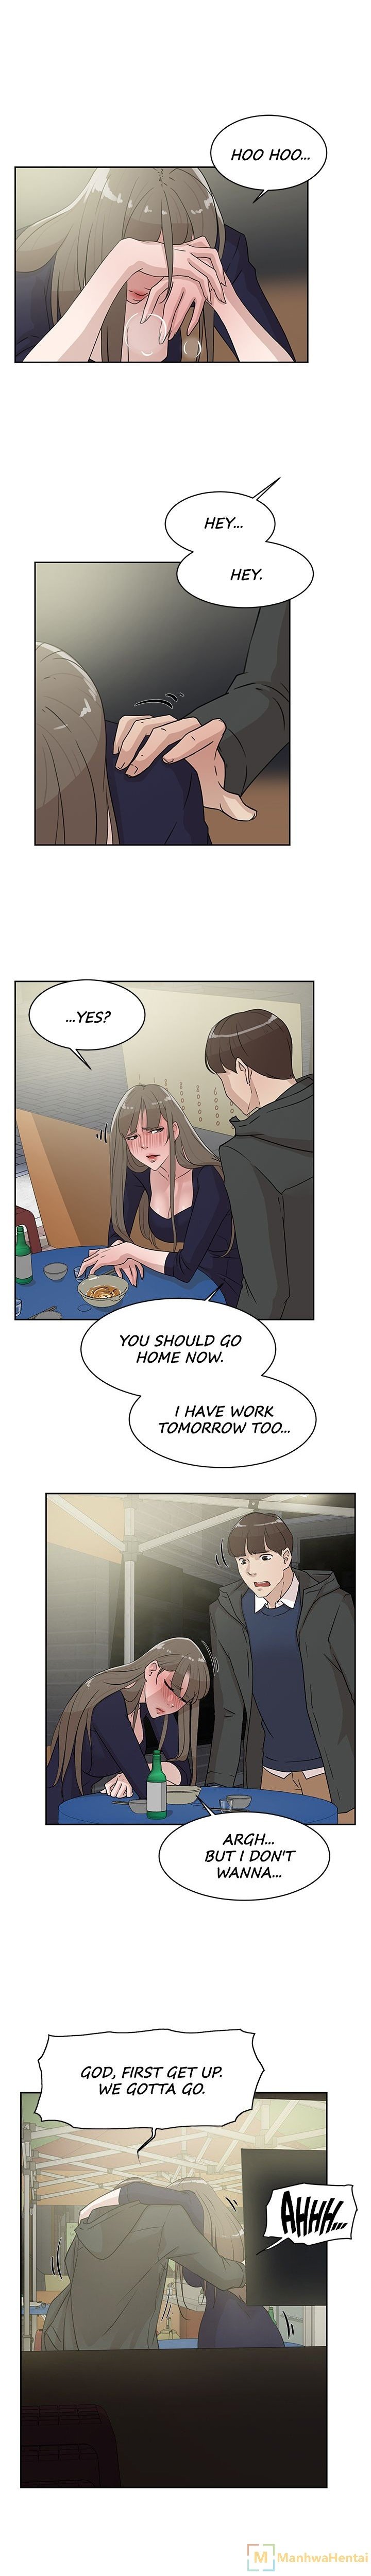 office-affairs-chap-31-7